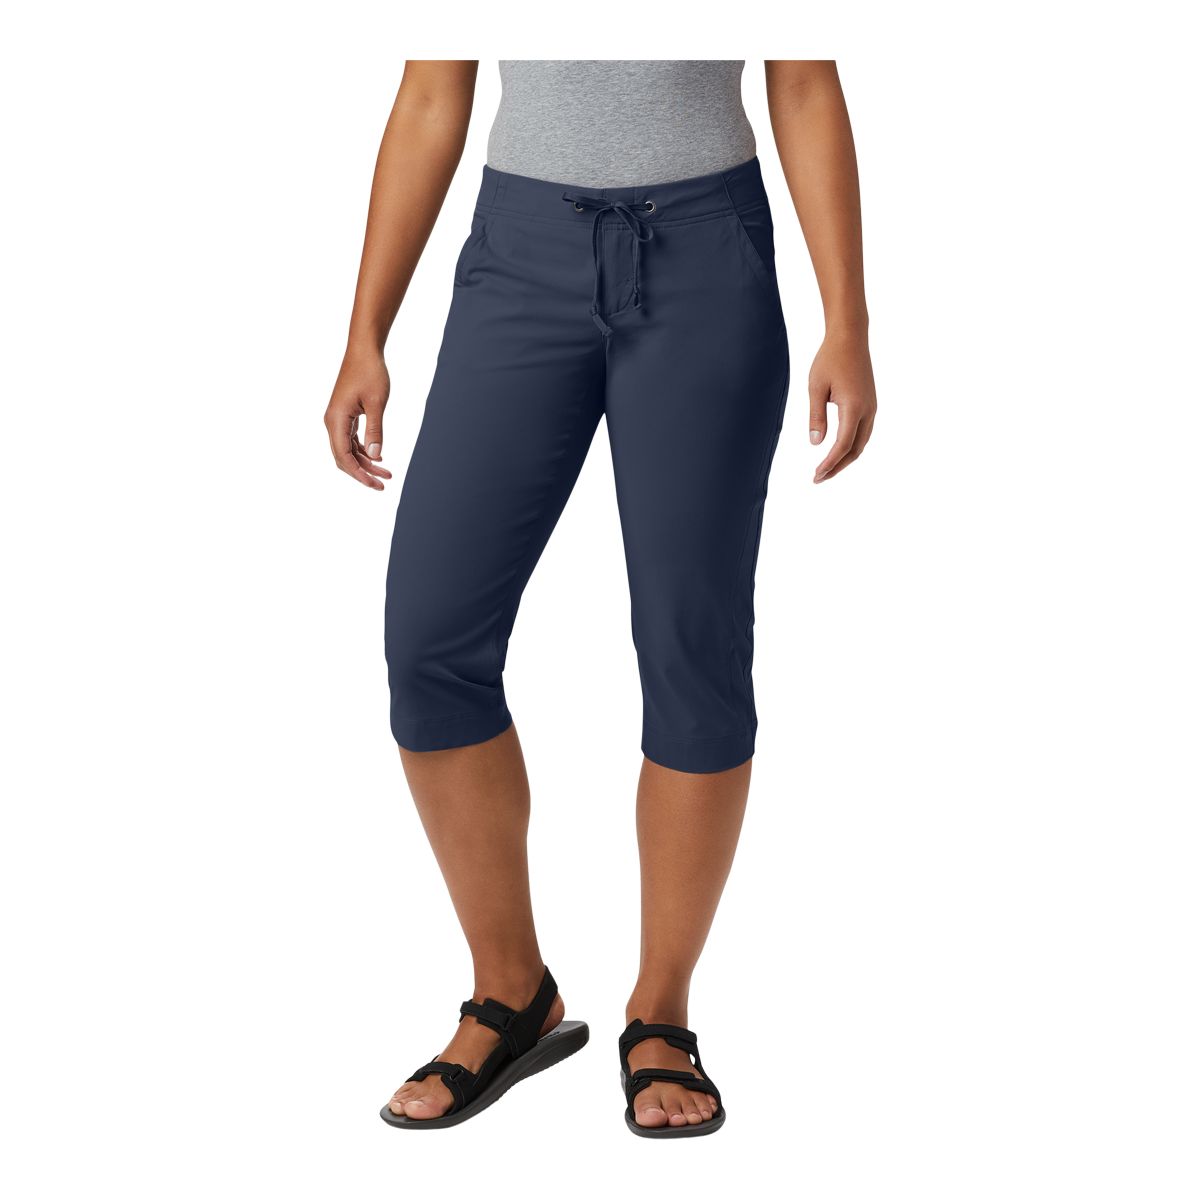 https://media-www.atmosphere.ca/product/div-03-softgoods/dpt-72-casual-clothing/sdpt-02-womens/333408155/columbia-w-anytime-outdoor-ca-nocturnal-2--3ded6ddf-be40-4672-a822-28632bd68eb1-jpgrendition.jpg